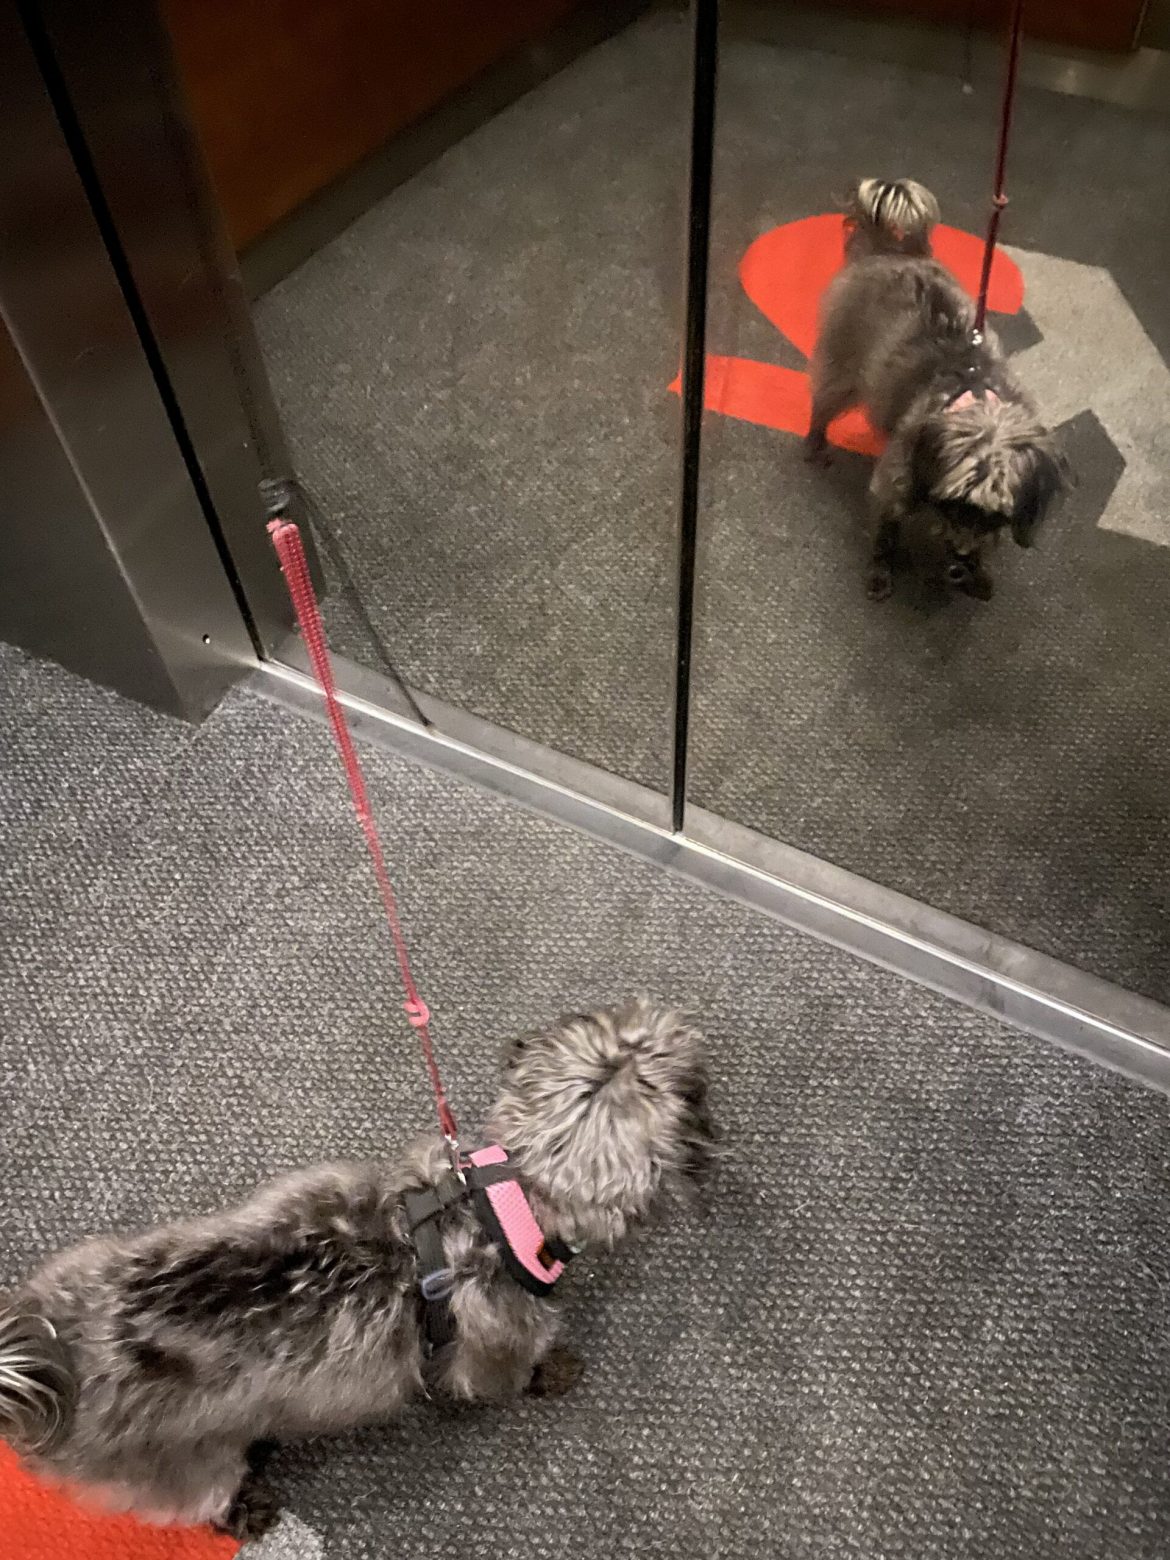 Teach Your Dog To Ride an Elevator